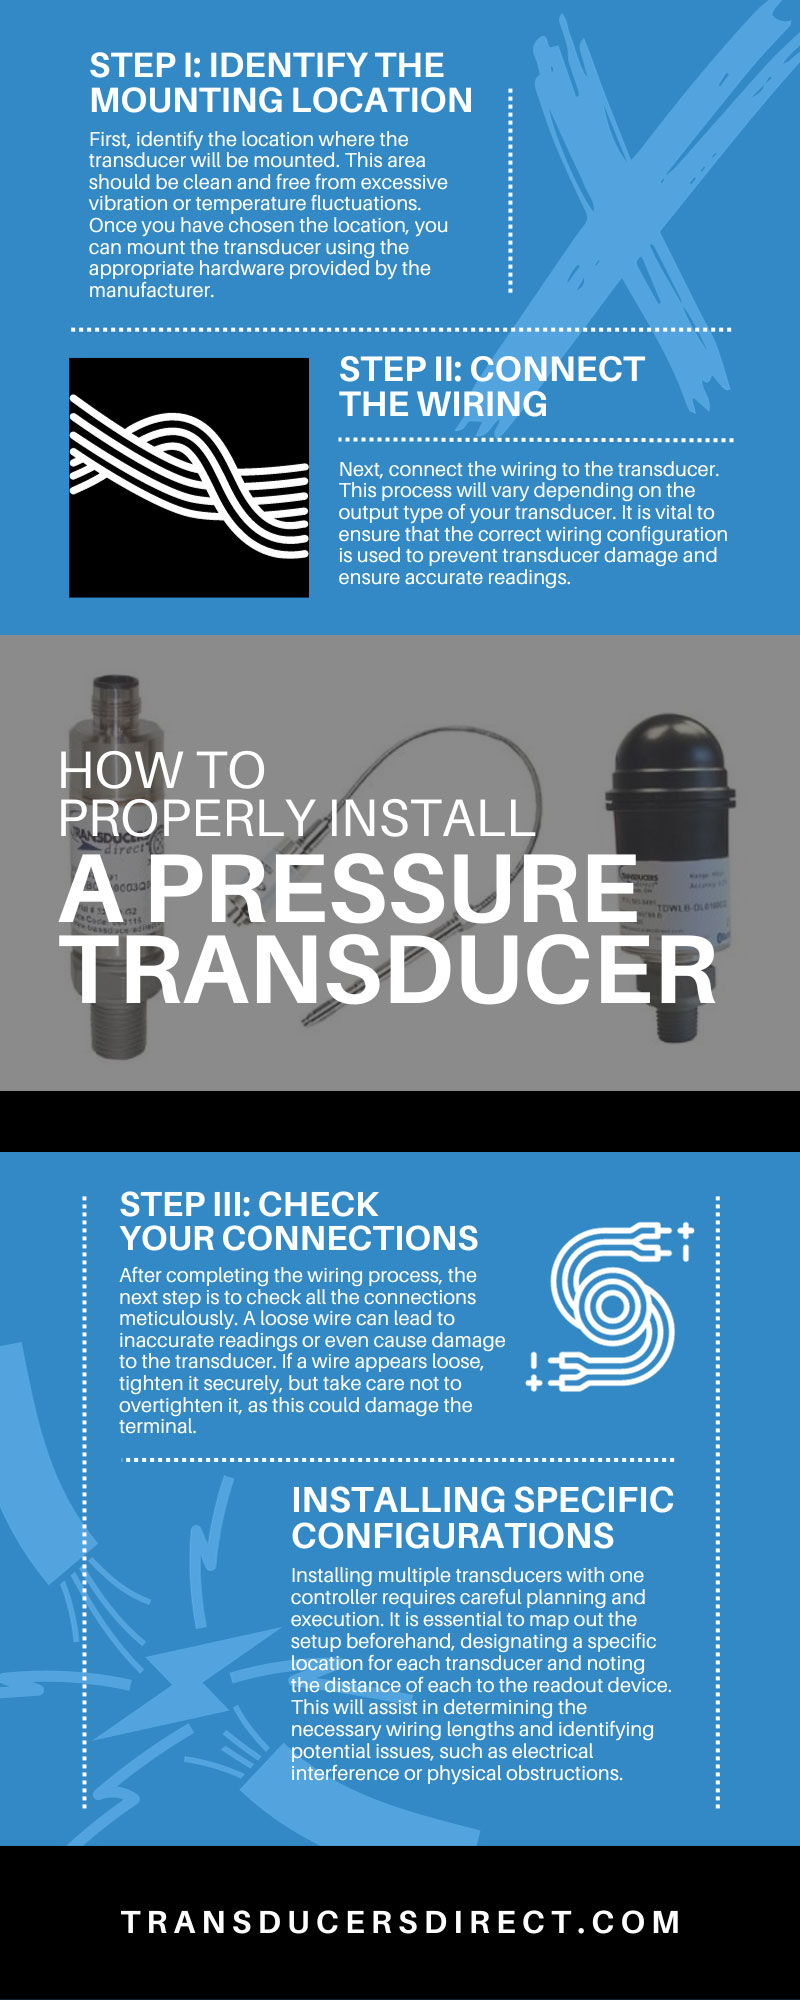 How To Properly Install a Pressure Transducer